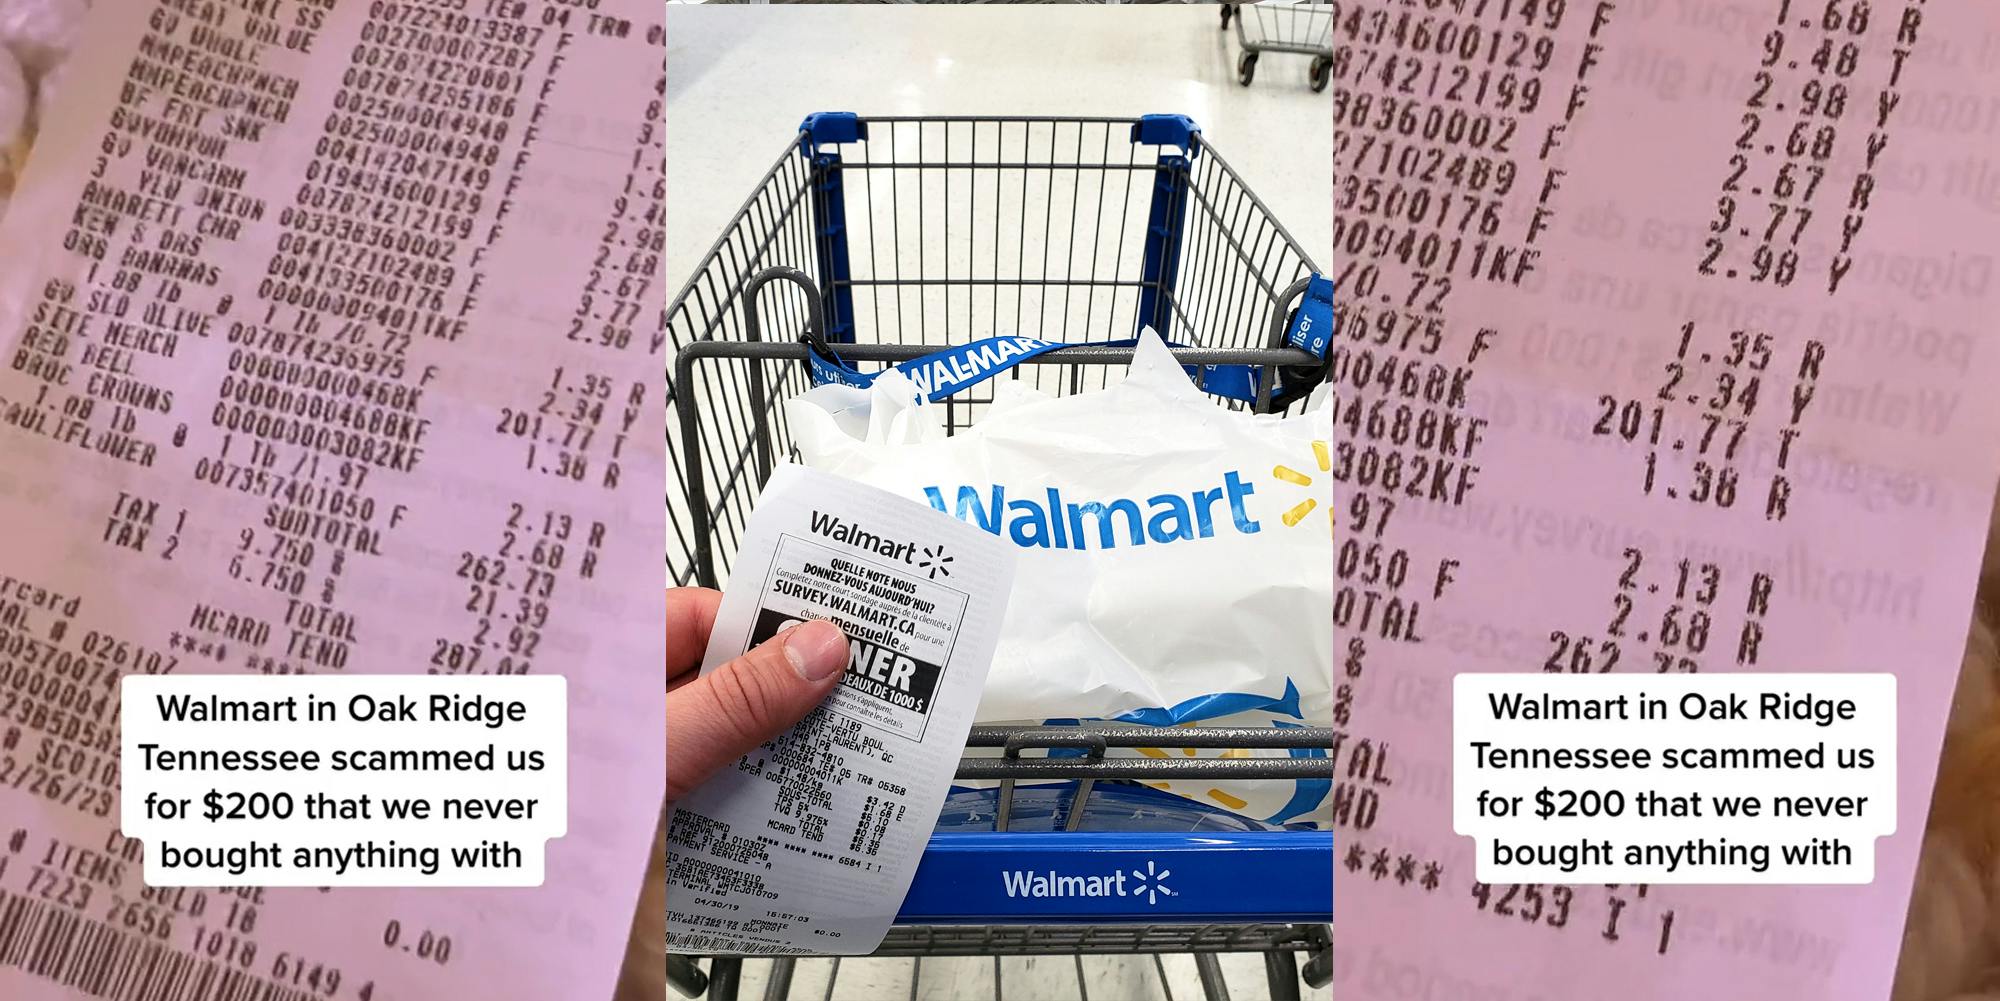 Walmart receipt with $201.77 charge for SITE MERCH with caption "Walmart in Oak Ridge Tennessee scammed us for $200 that we never bought anything with" (l) hand holding Walmart receipt in store with cart and bag (c) Walmart receipt with $201.77 charge for SITE MERCH with caption "Walmart in Oak Ridge Tennessee scammed us for $200 that we never bought anything with" (r)